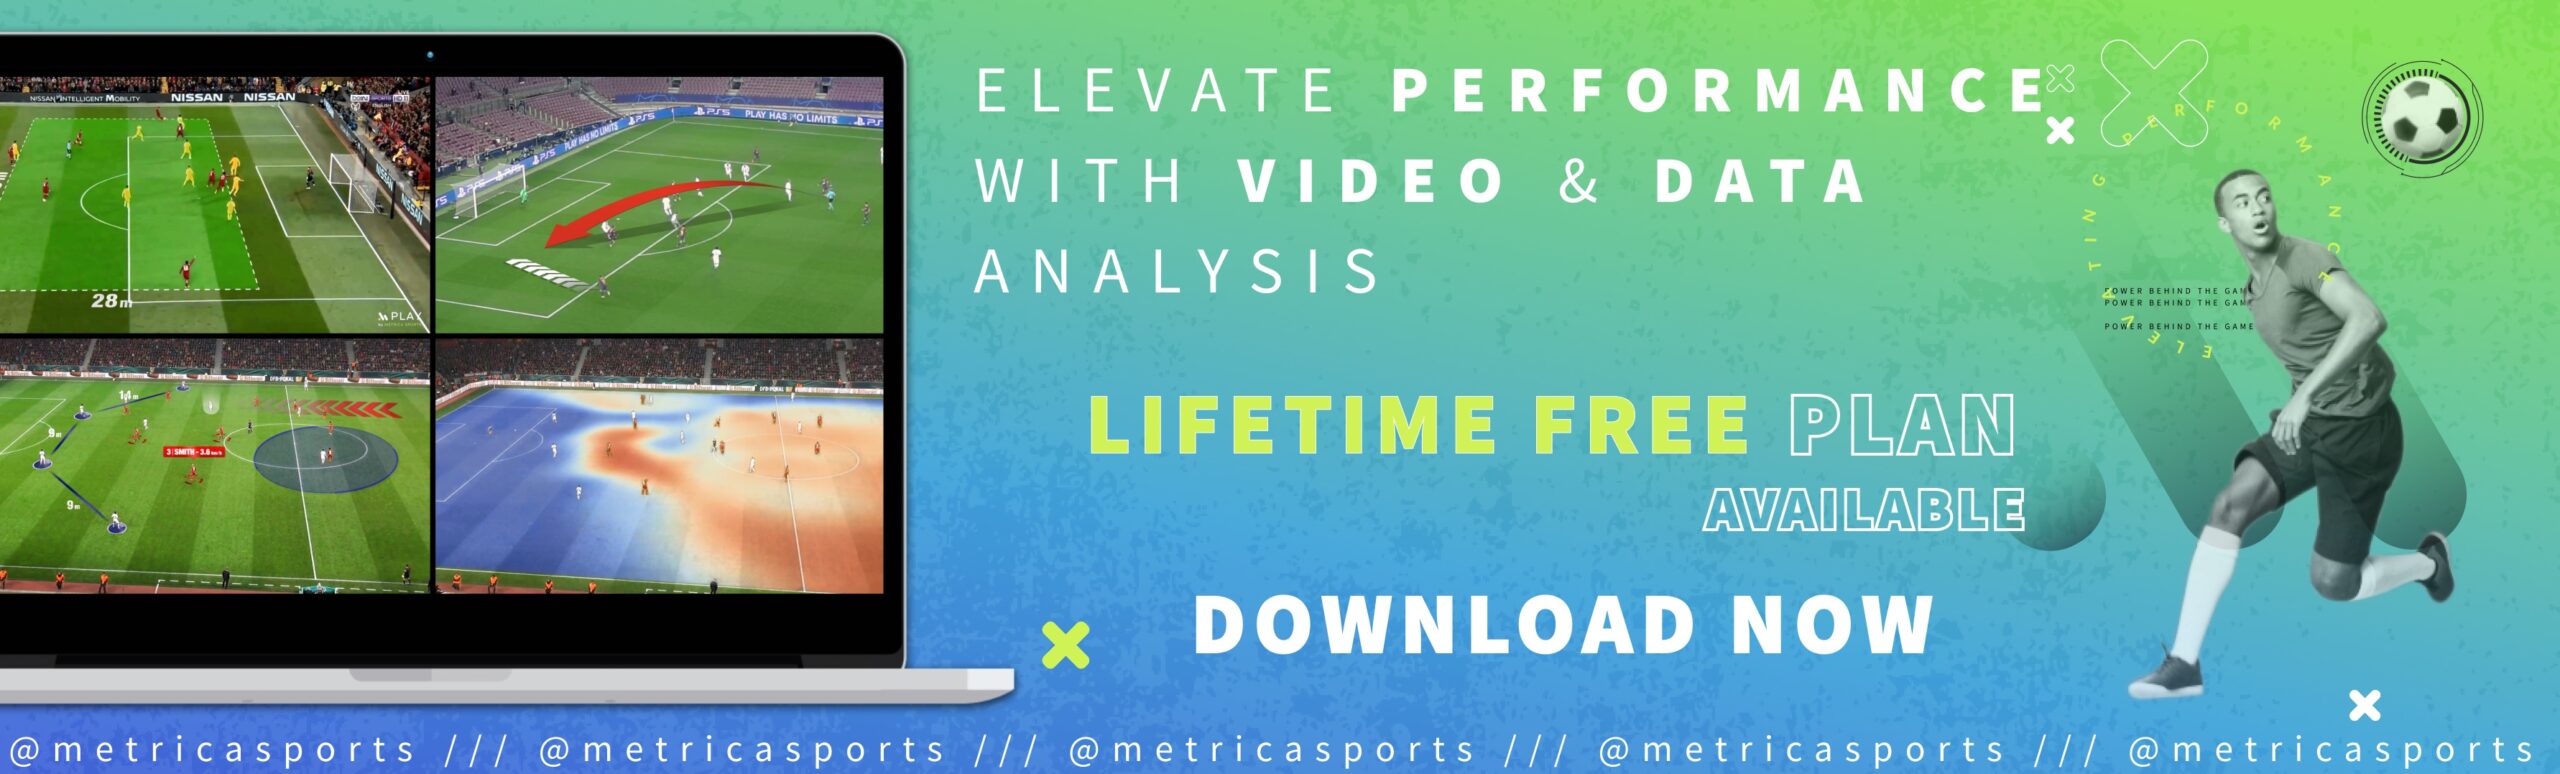 ad banner to get a lifetime free plan to elevate performance with video & data analysys, of @metricasports